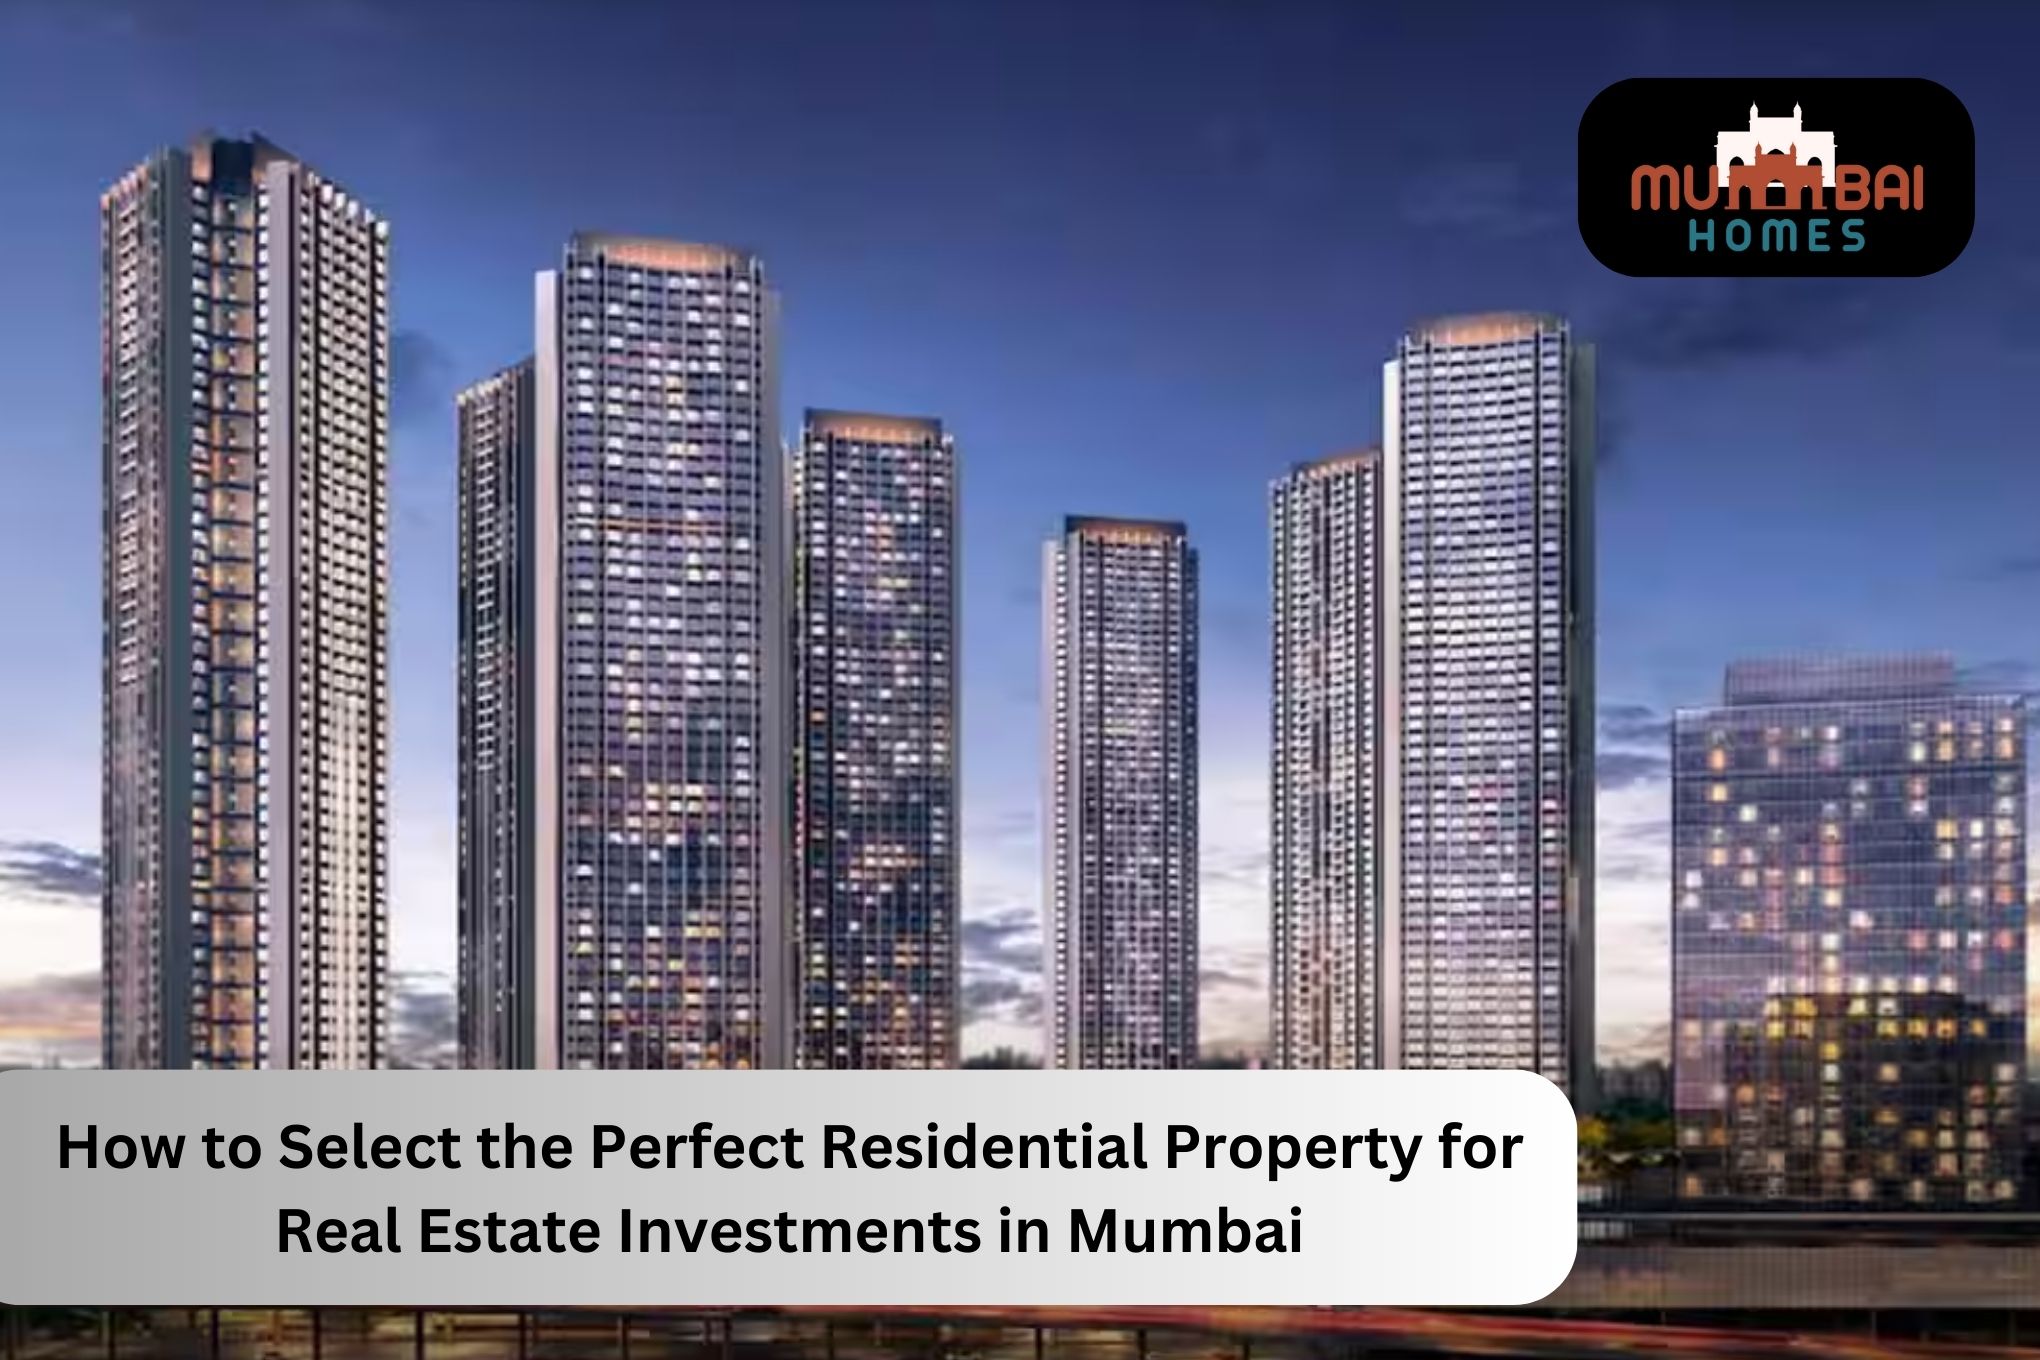 How to Select the Perfect Residential Property for Real Estate Investments in Mumbai